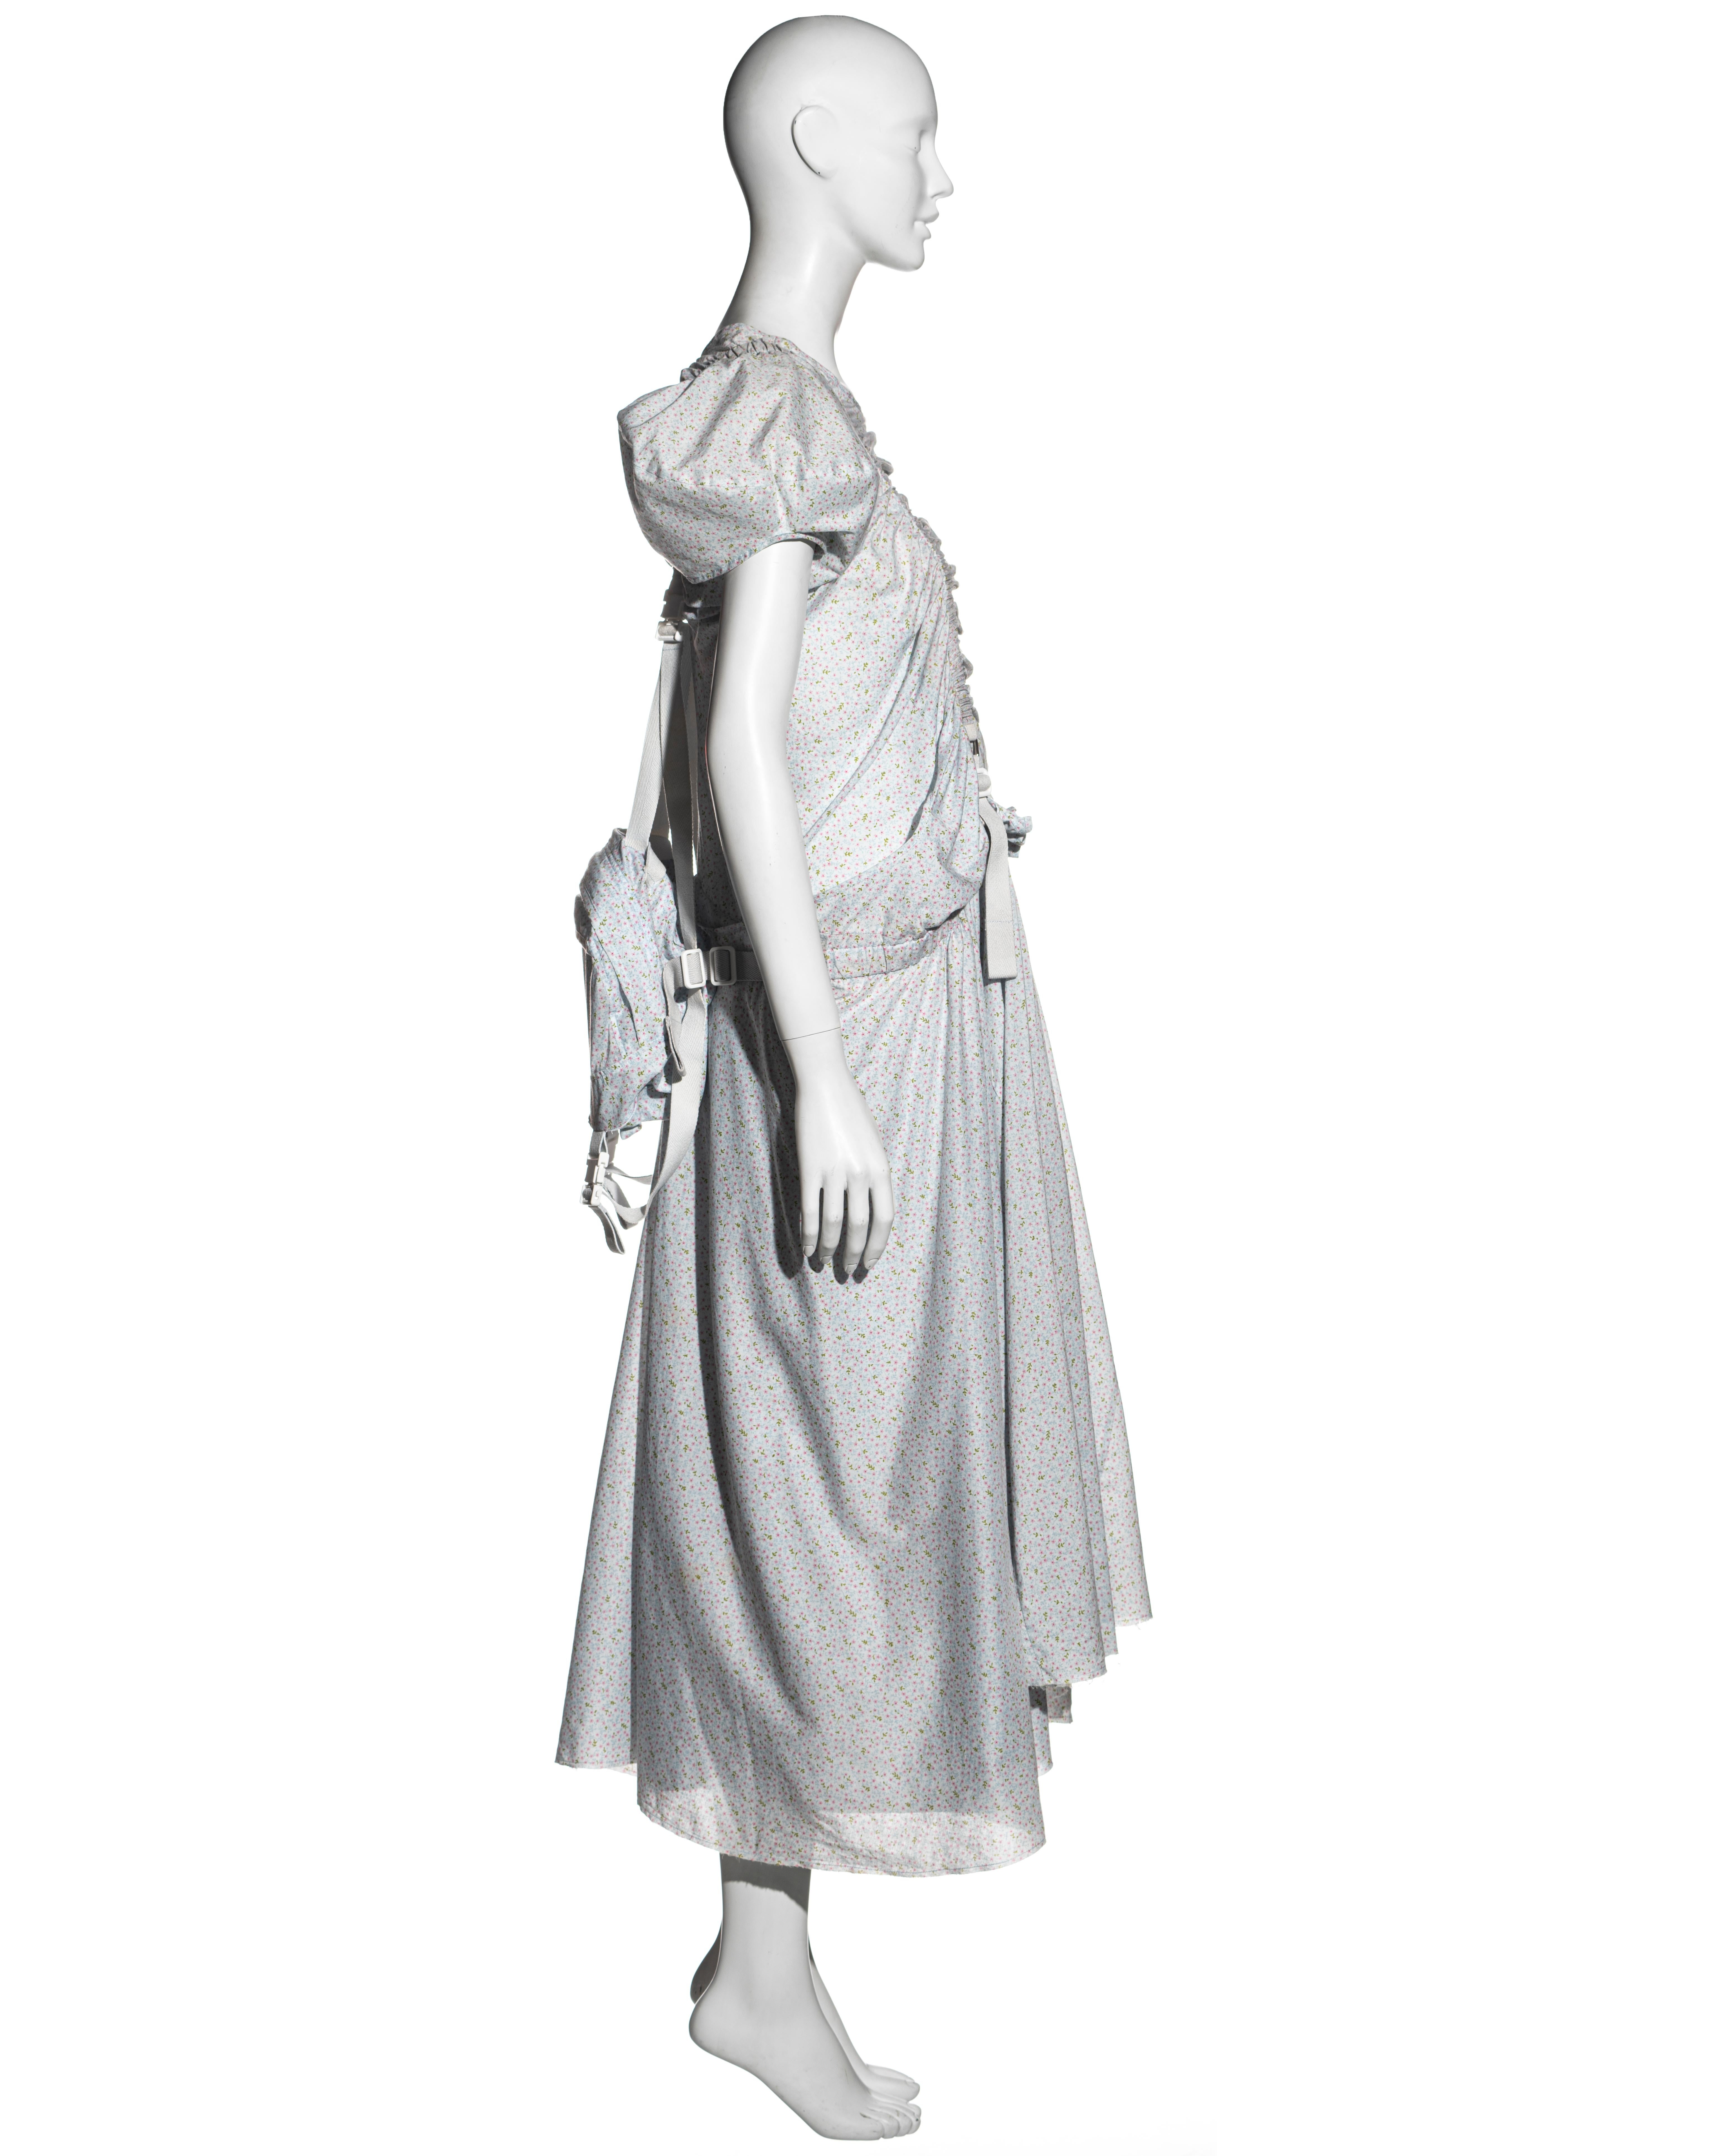 Gray Junya Watanabe floral cotton dress with harness straps and backpack, ss 2003 For Sale